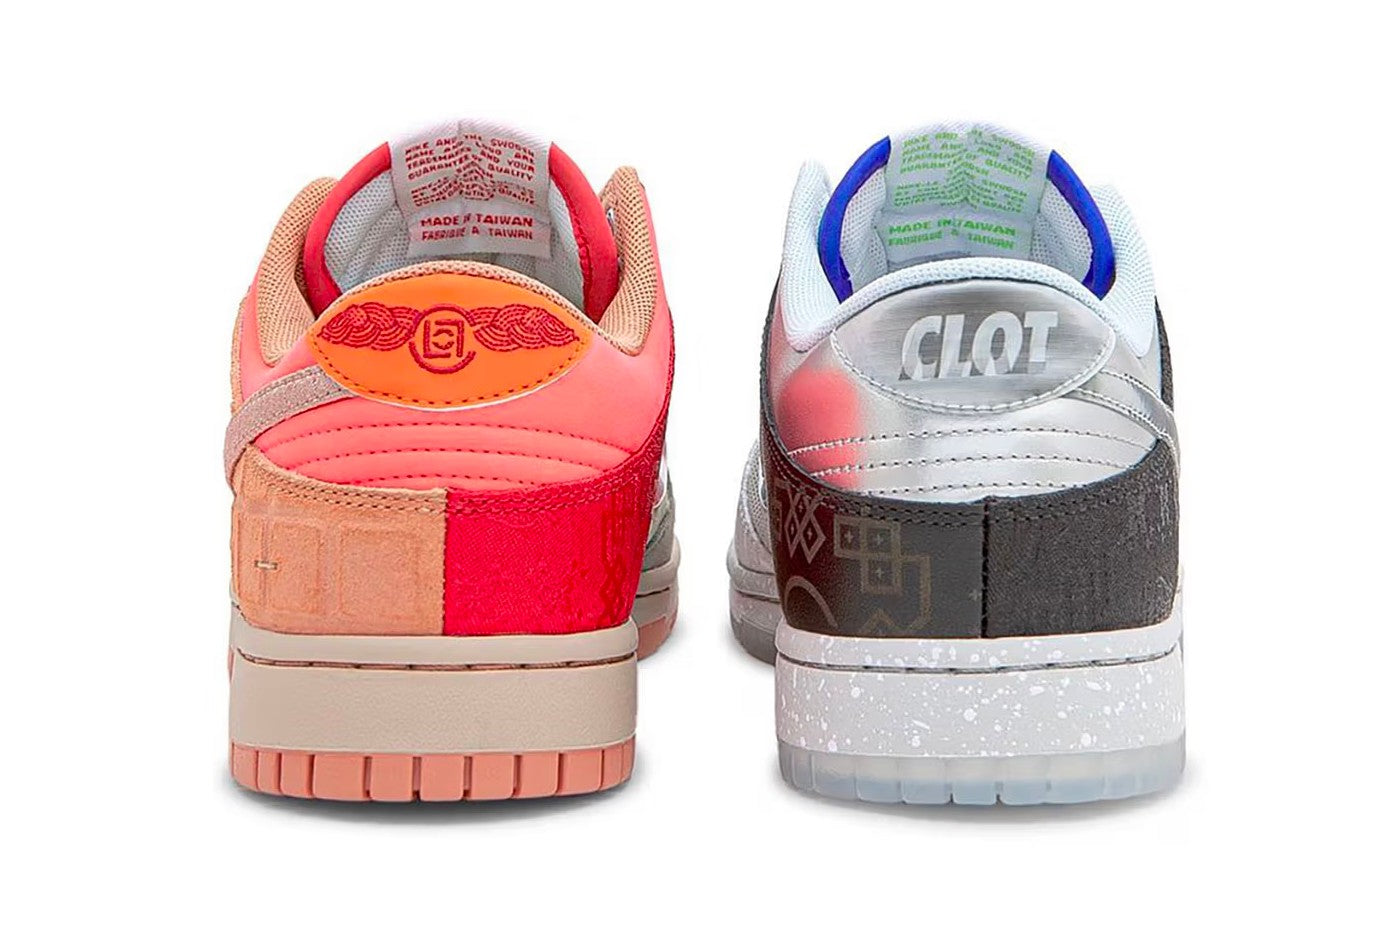 The CLOT x Nike Dunk Low "What The" Signals the Beginning of the End